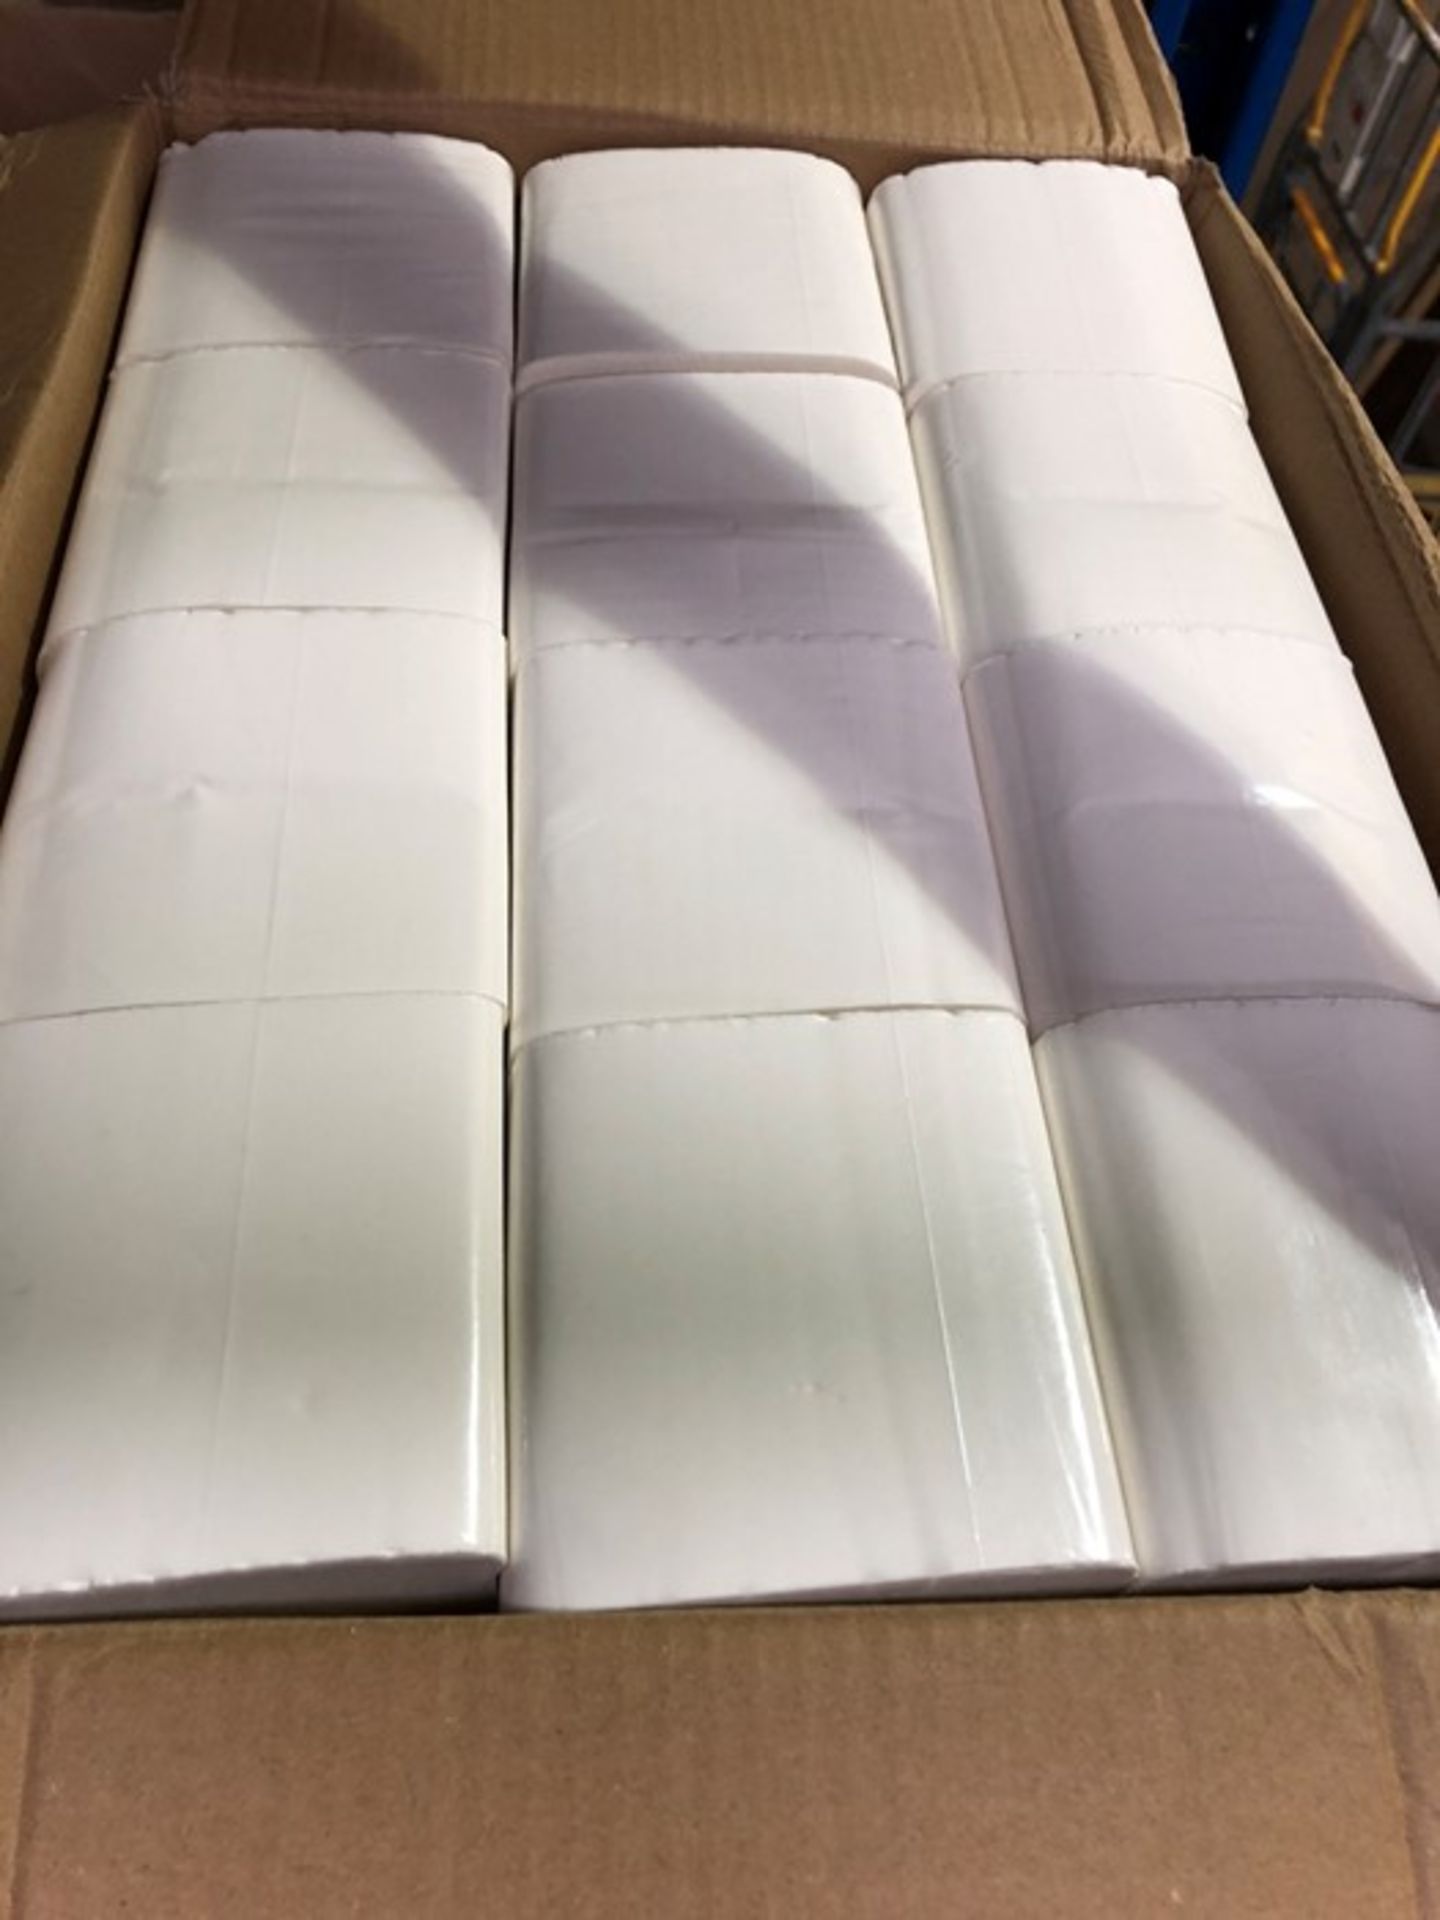 1 BOX TO CONTAIN 36 PACKS OF PAPER HAND TOWELS - 250 SHEETS PER PACK / PN - 871 (PUBLIC VIEWING